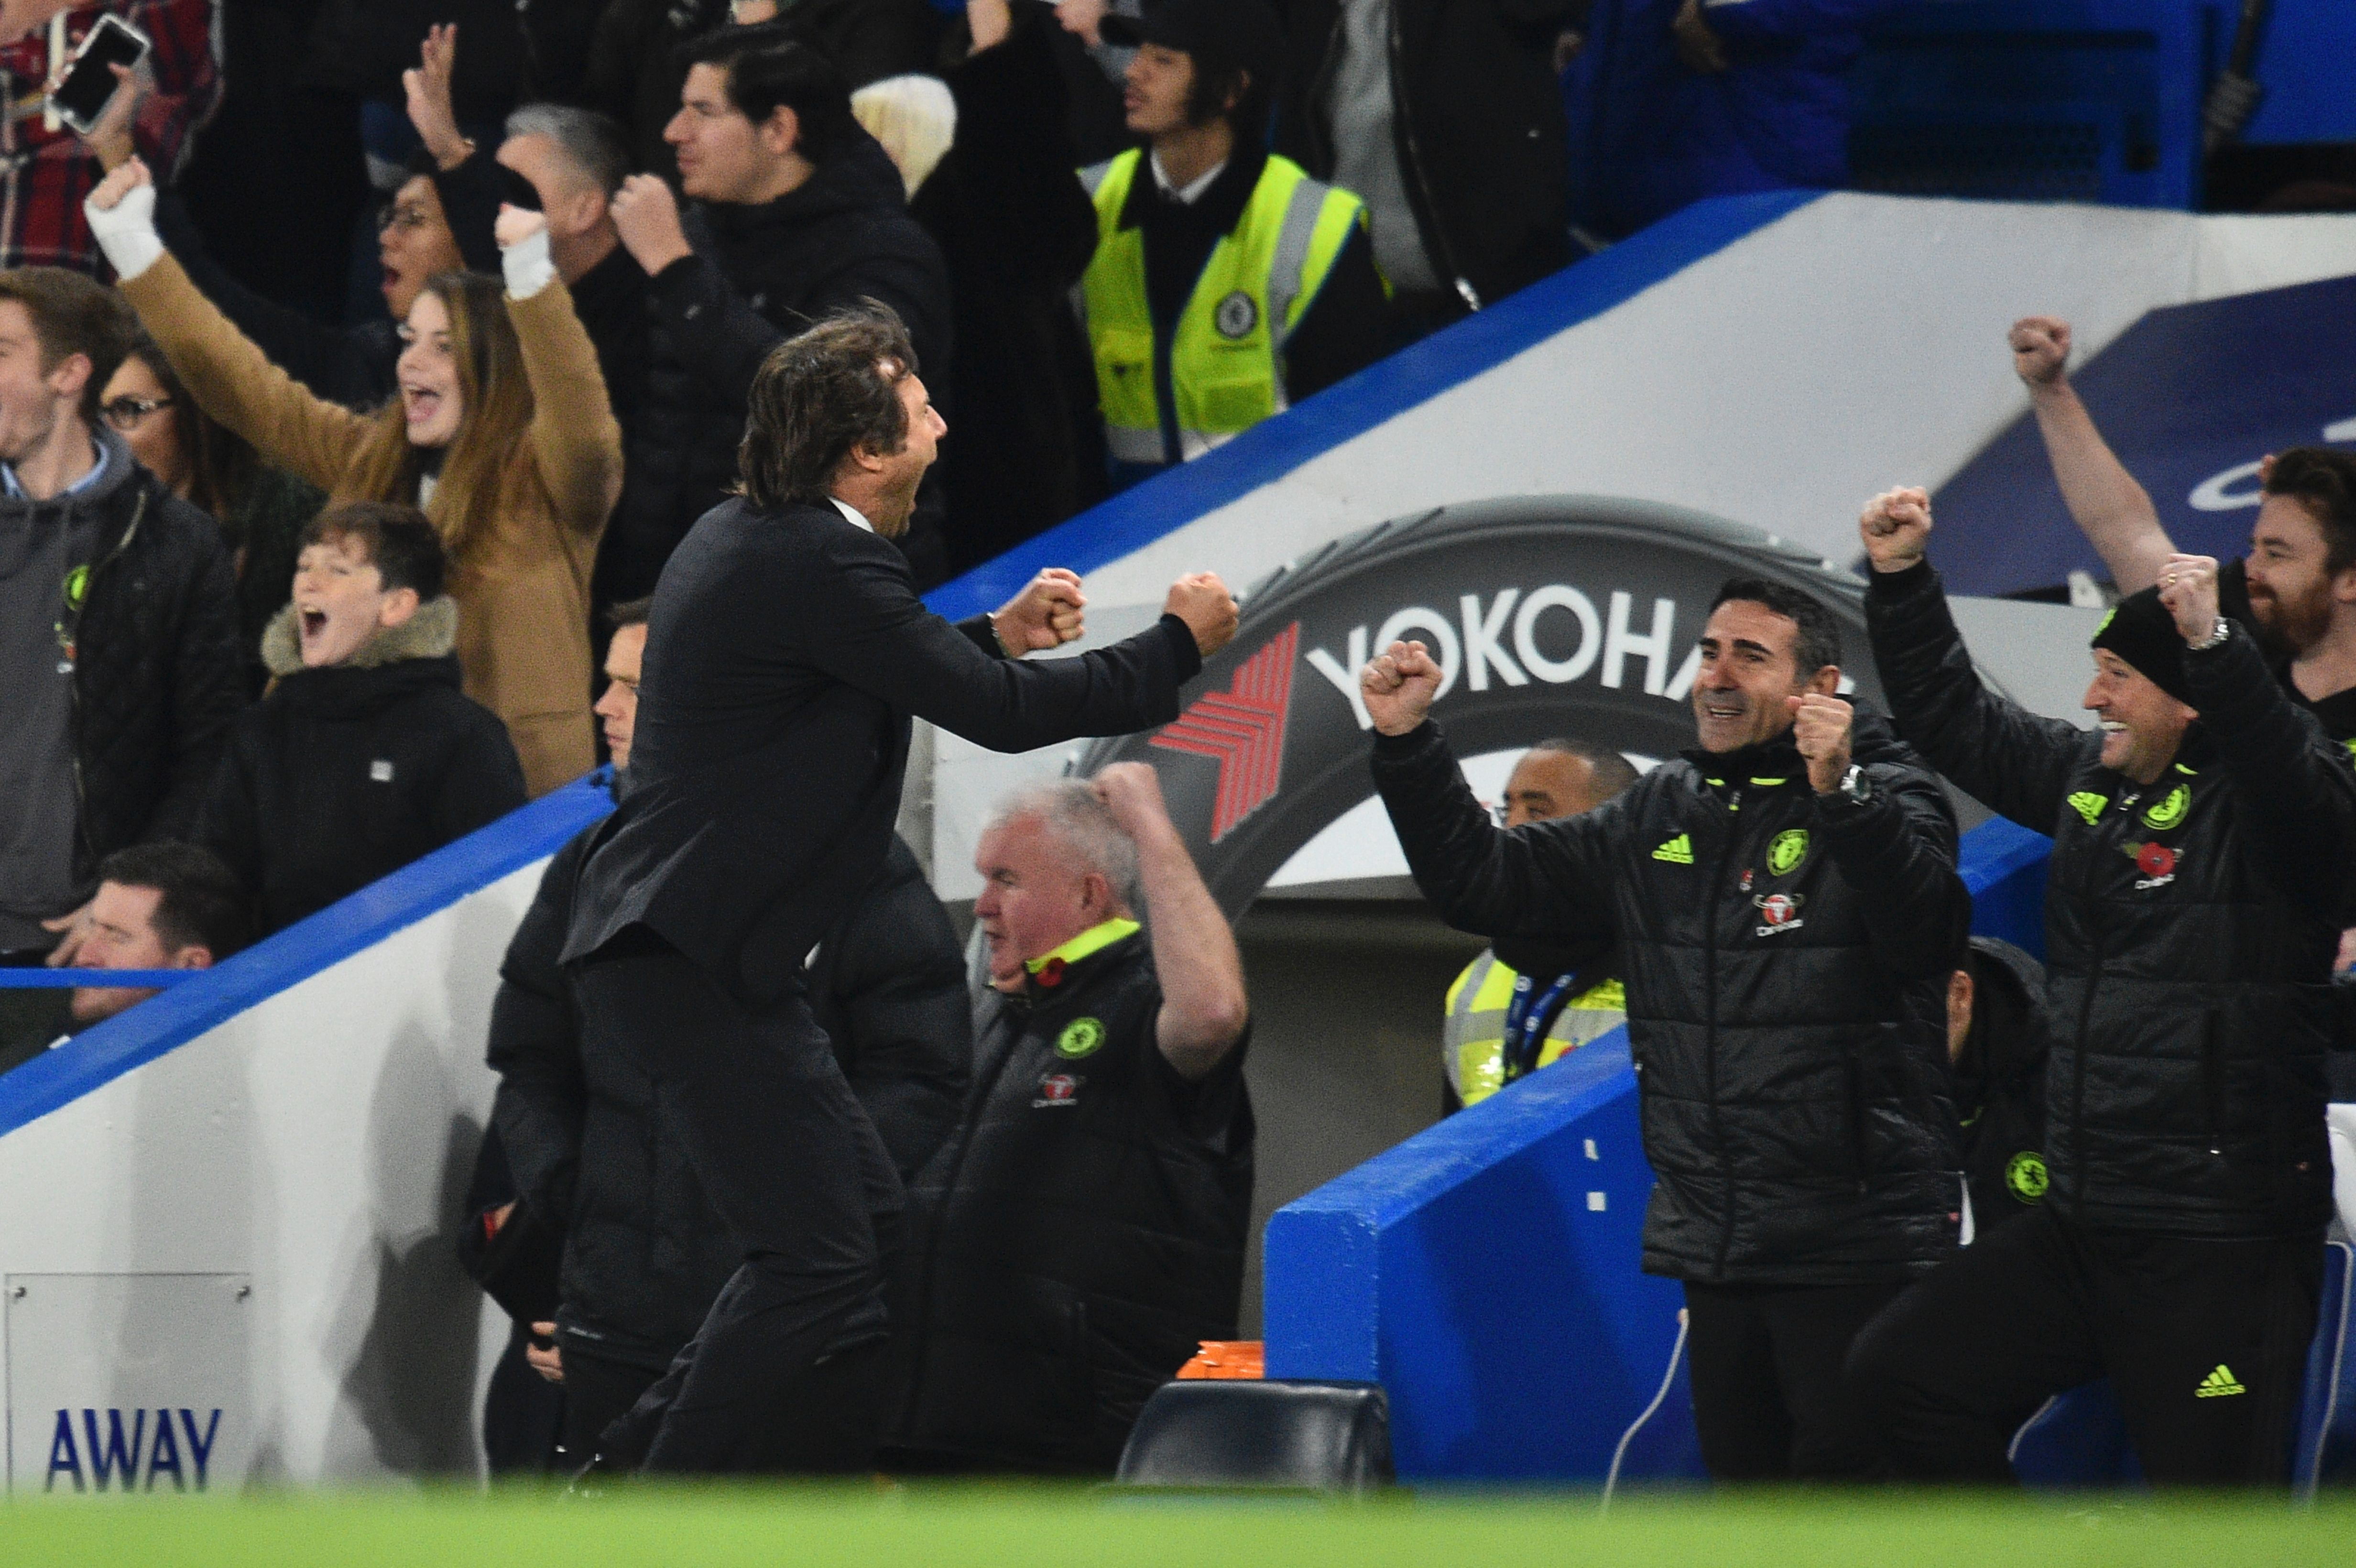 Chelsea's Italian head coach Antonio Conte celebrates as Hazard scores Chelsea's fourth goal during the English Premier League football match between Chelsea and Everton at Stamford Bridge in London on November 5, 2016. / AFP / Glyn KIRK / RESTRICTED TO EDITORIAL USE. No use with unauthorized audio, video, data, fixture lists, club/league logos or 'live' services. Online in-match use limited to 75 images, no video emulation. No use in betting, games or single club/league/player publications.  /         (Photo credit should read GLYN KIRK/AFP/Getty Images)